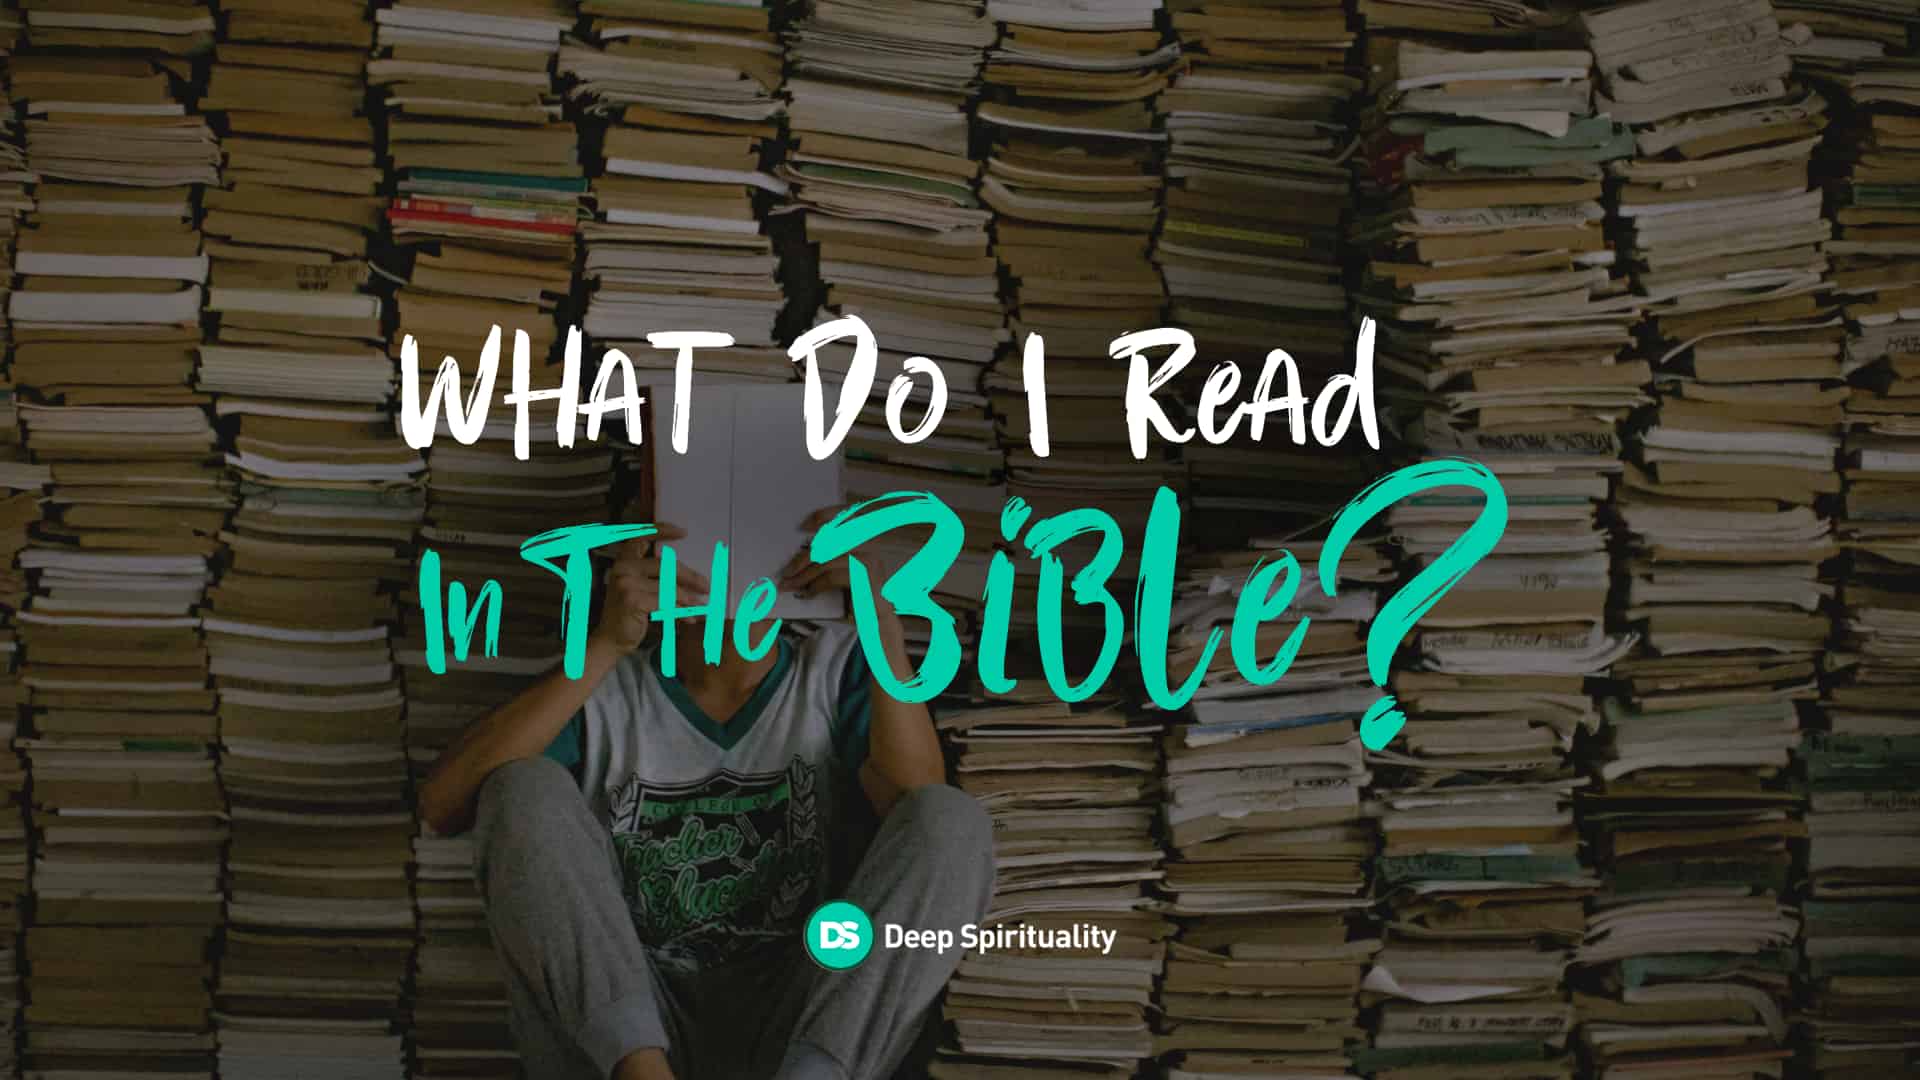 Help! How Do I Know What to Read in the Bible? 7